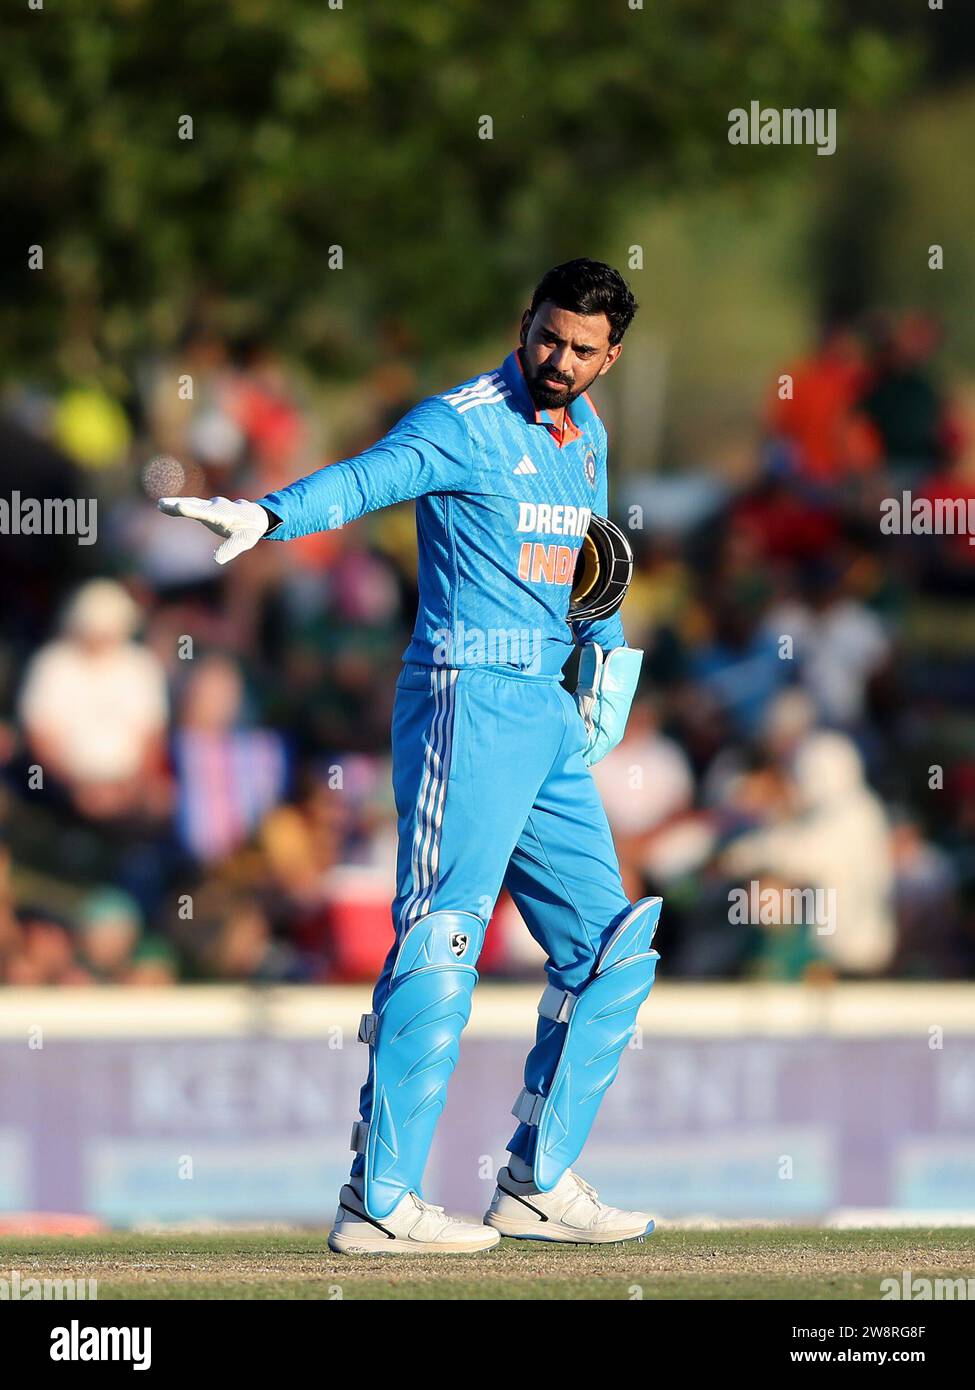 PAARL, SOUTH AFRICA - DECEMBER 21: India captain KL Rahul during the 3rd One Day International match between South Africa and India at Boland Park on December 21, 2023 in Paarl, South Africa. Photo by Shaun Roy/Alamy Live News Stock Photo